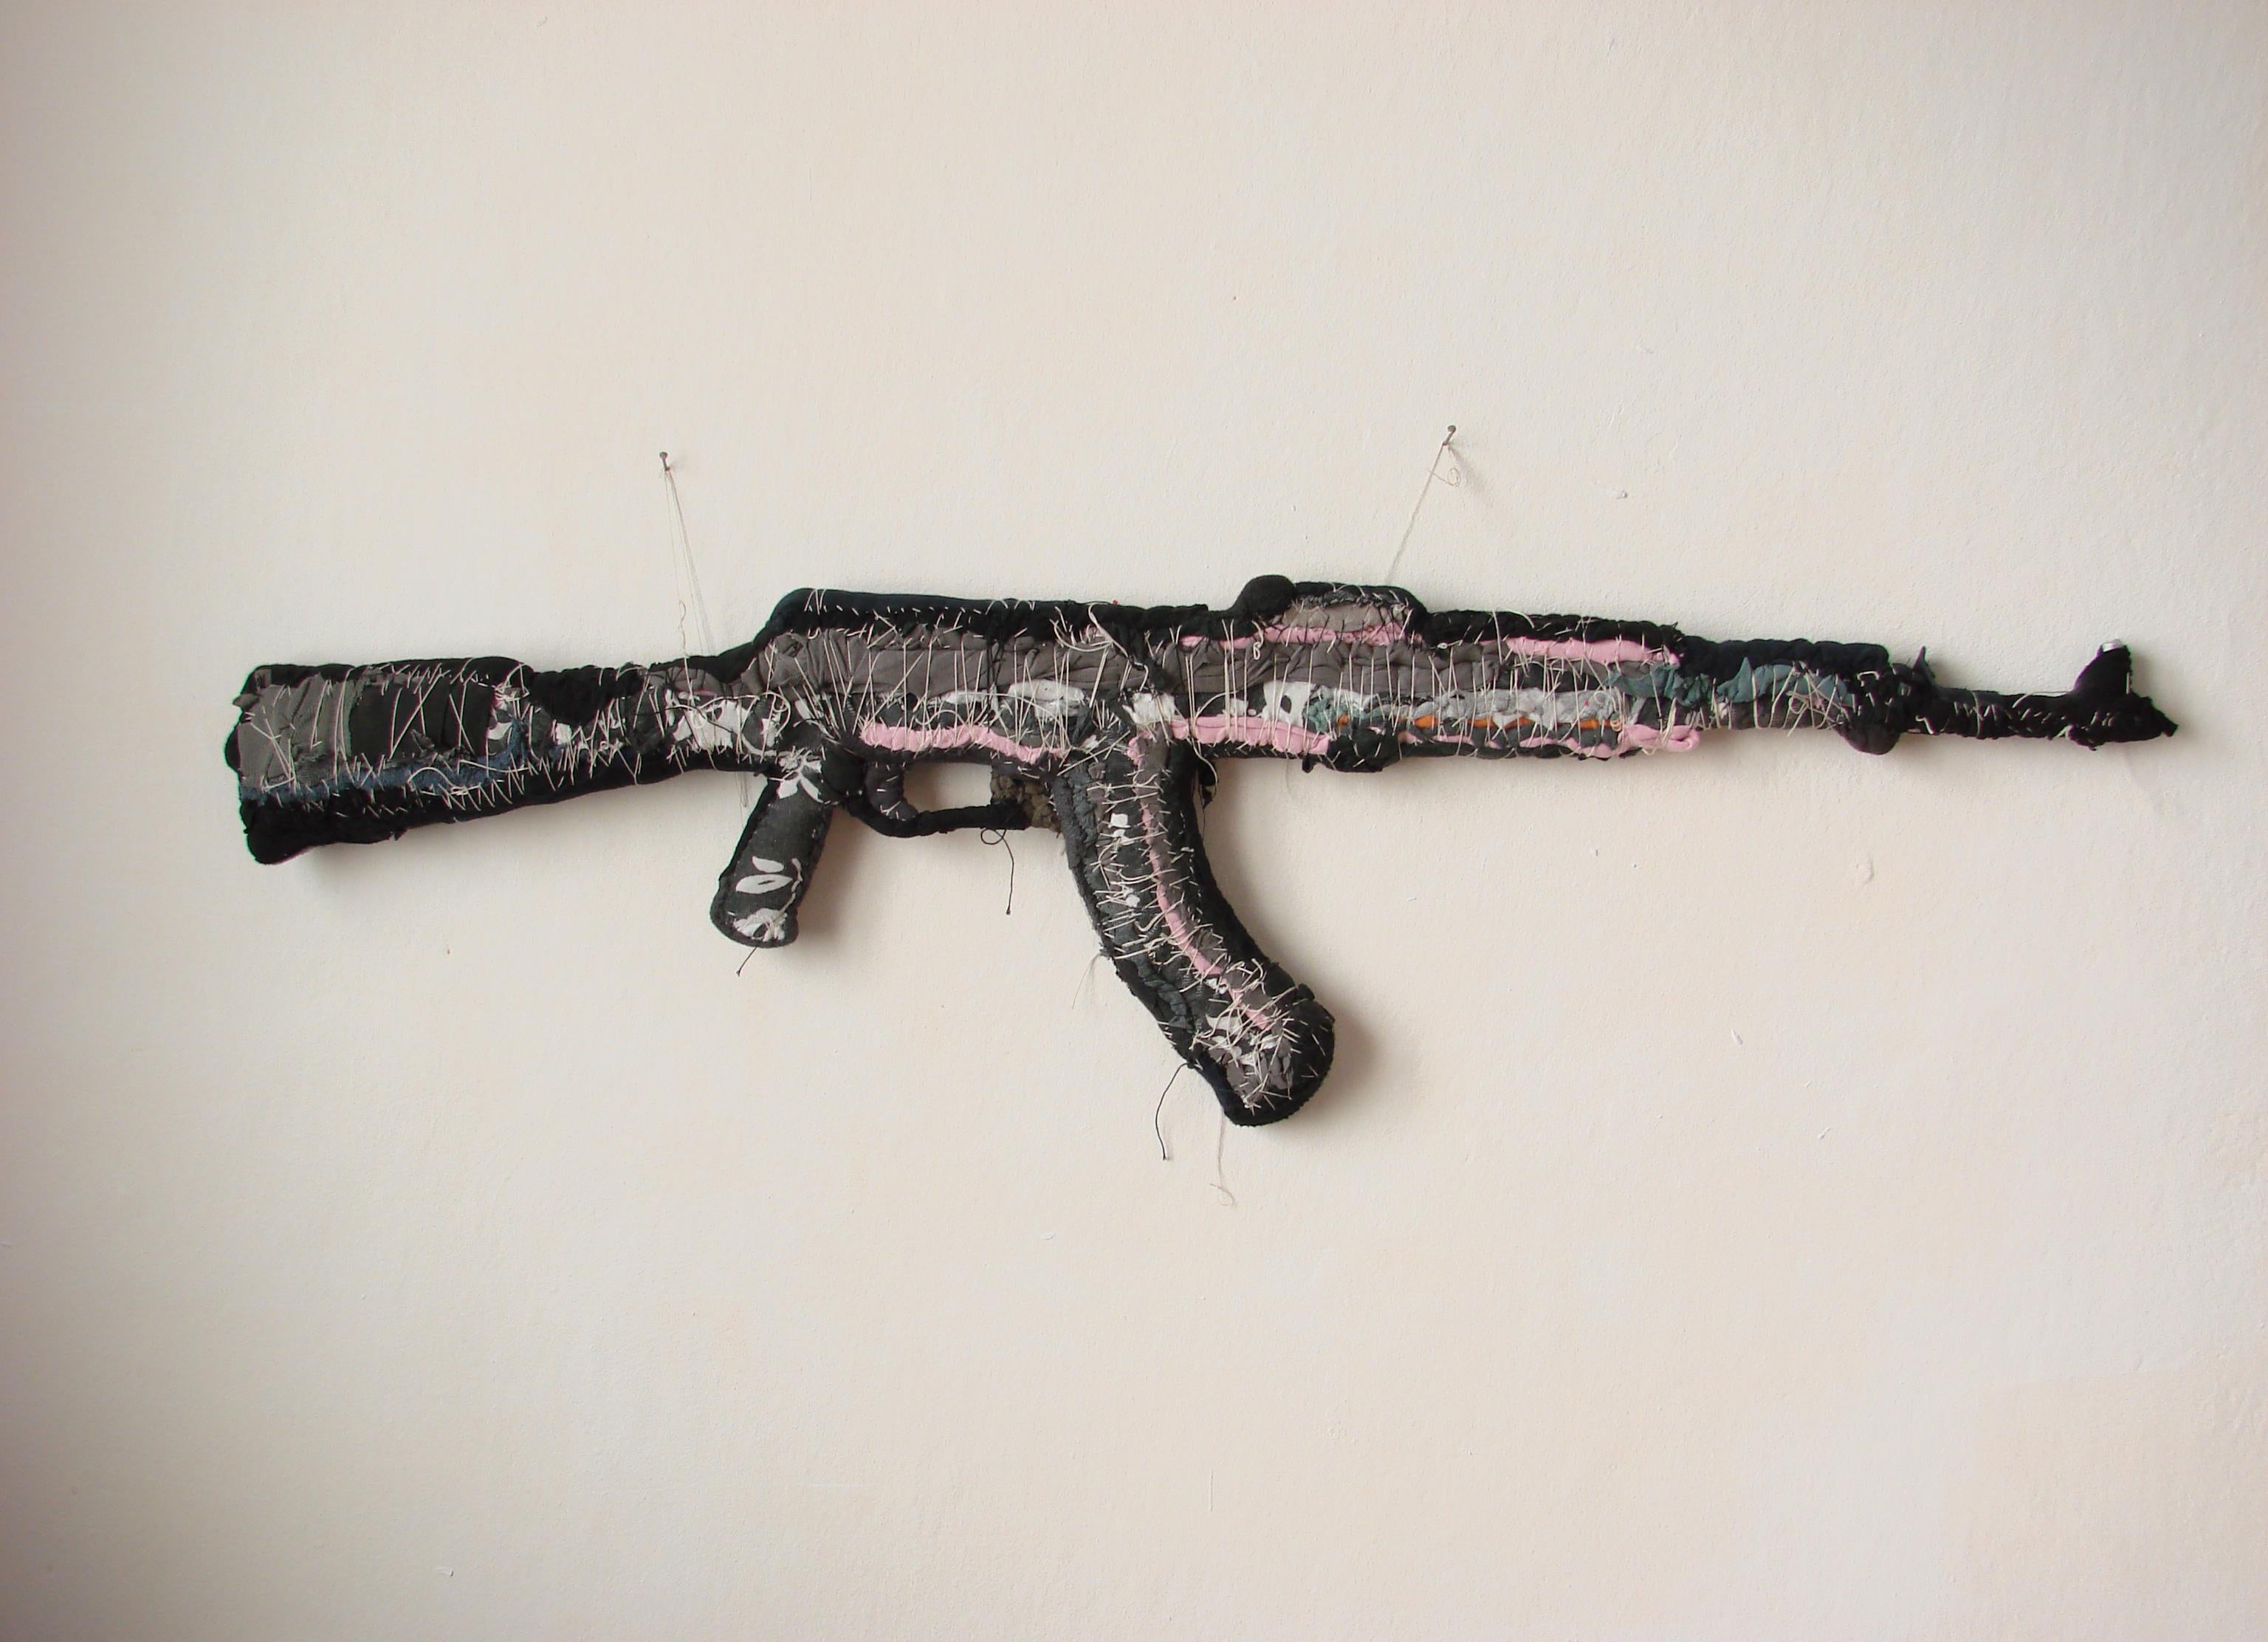 WATER RIFLE - Modern obiect sculpture made of steel and fabric